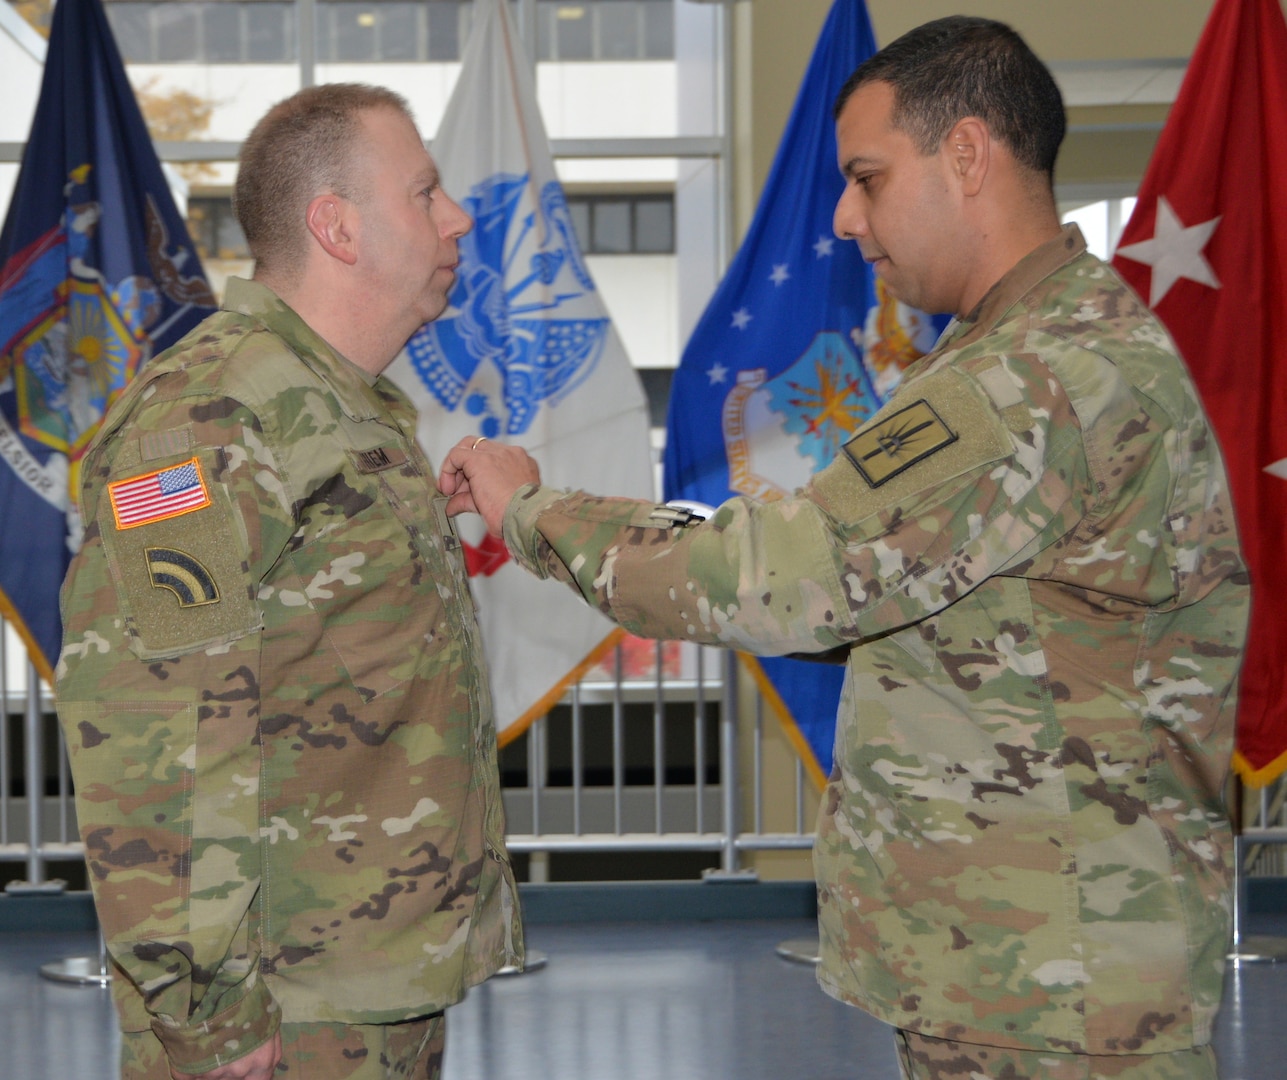 Col. John Andonie, chief of staff for the New York Army National Guard, pins Chief Warrant Officer 3 Albert Thiem, electronic warfare officer for the 42nd Infantry Division,during his promotion ceremony at the Division of Military and Naval Affairs Headquarters in Latham, N.Y., Nov. 9, 2018.